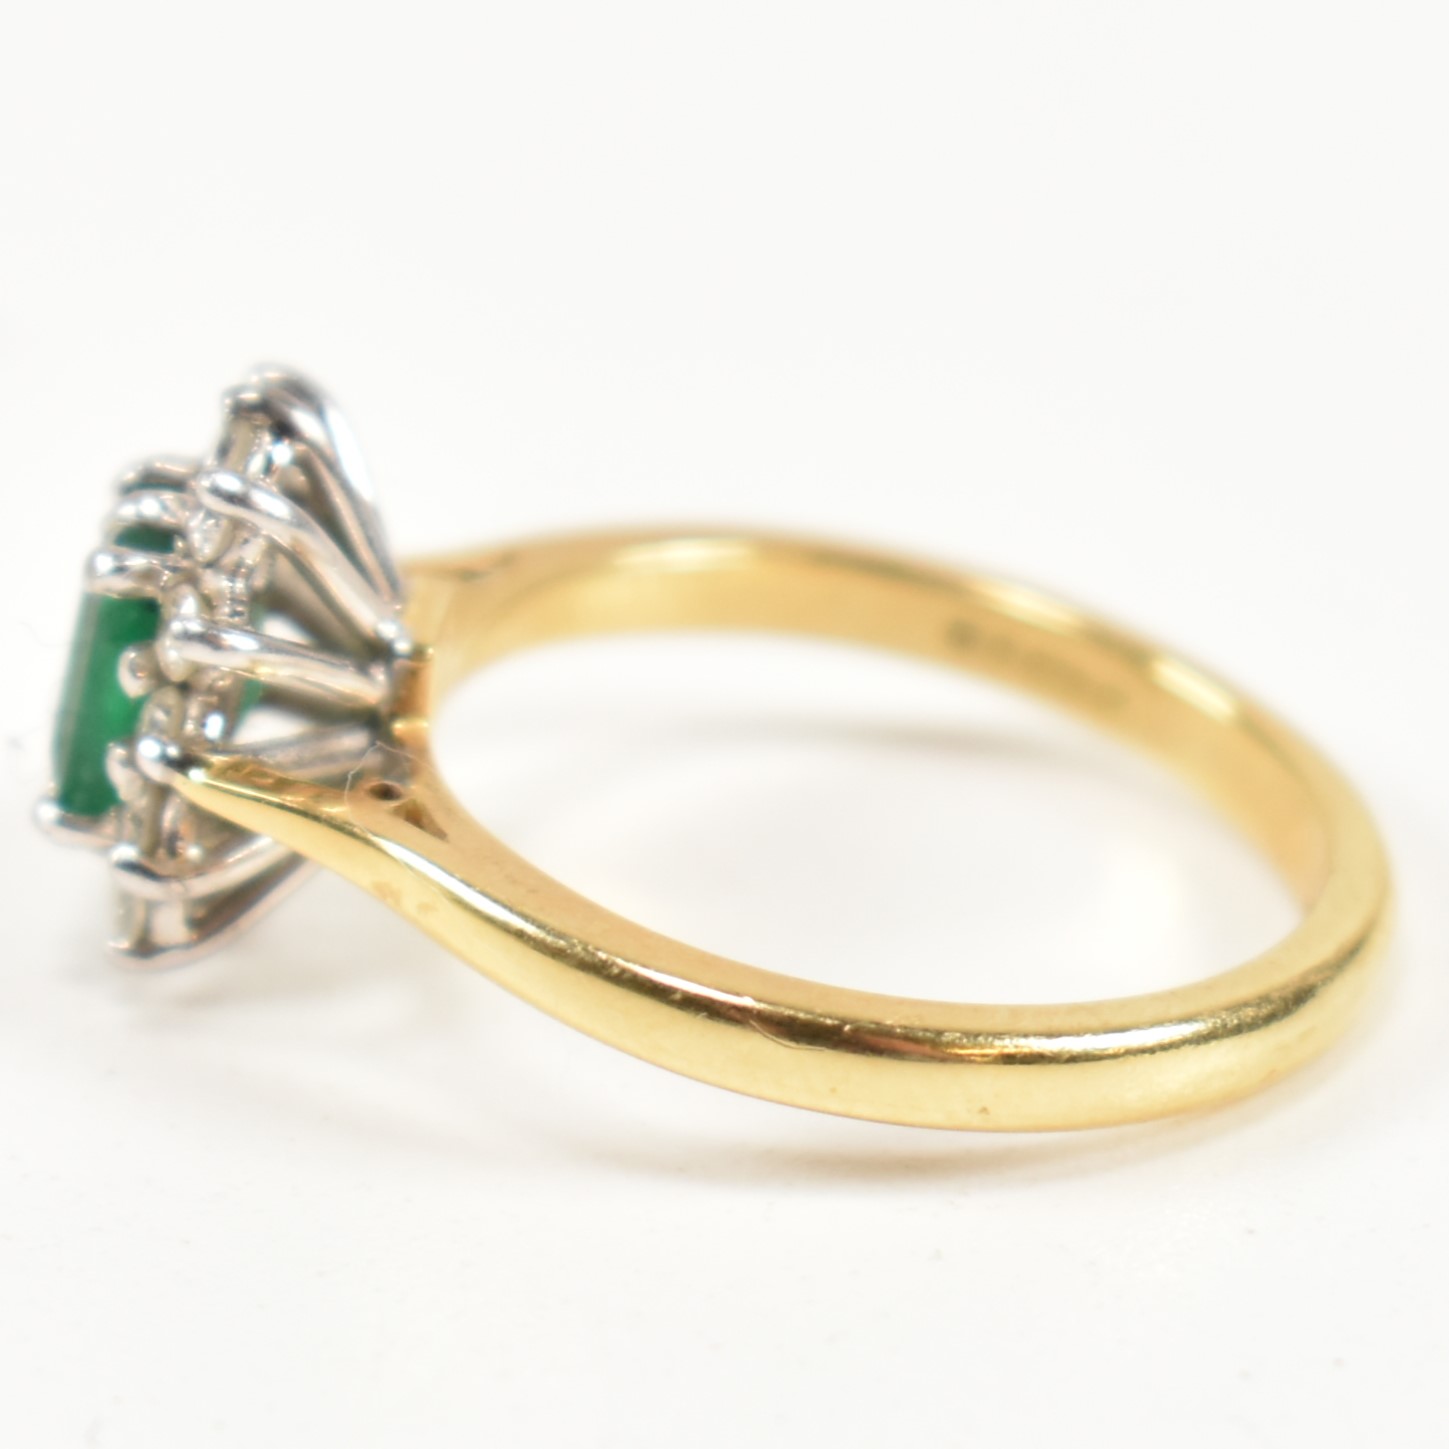 HALLMARKED 18CT GOLD EMERALD & DIAMOND CLUSTER RING - Image 6 of 9